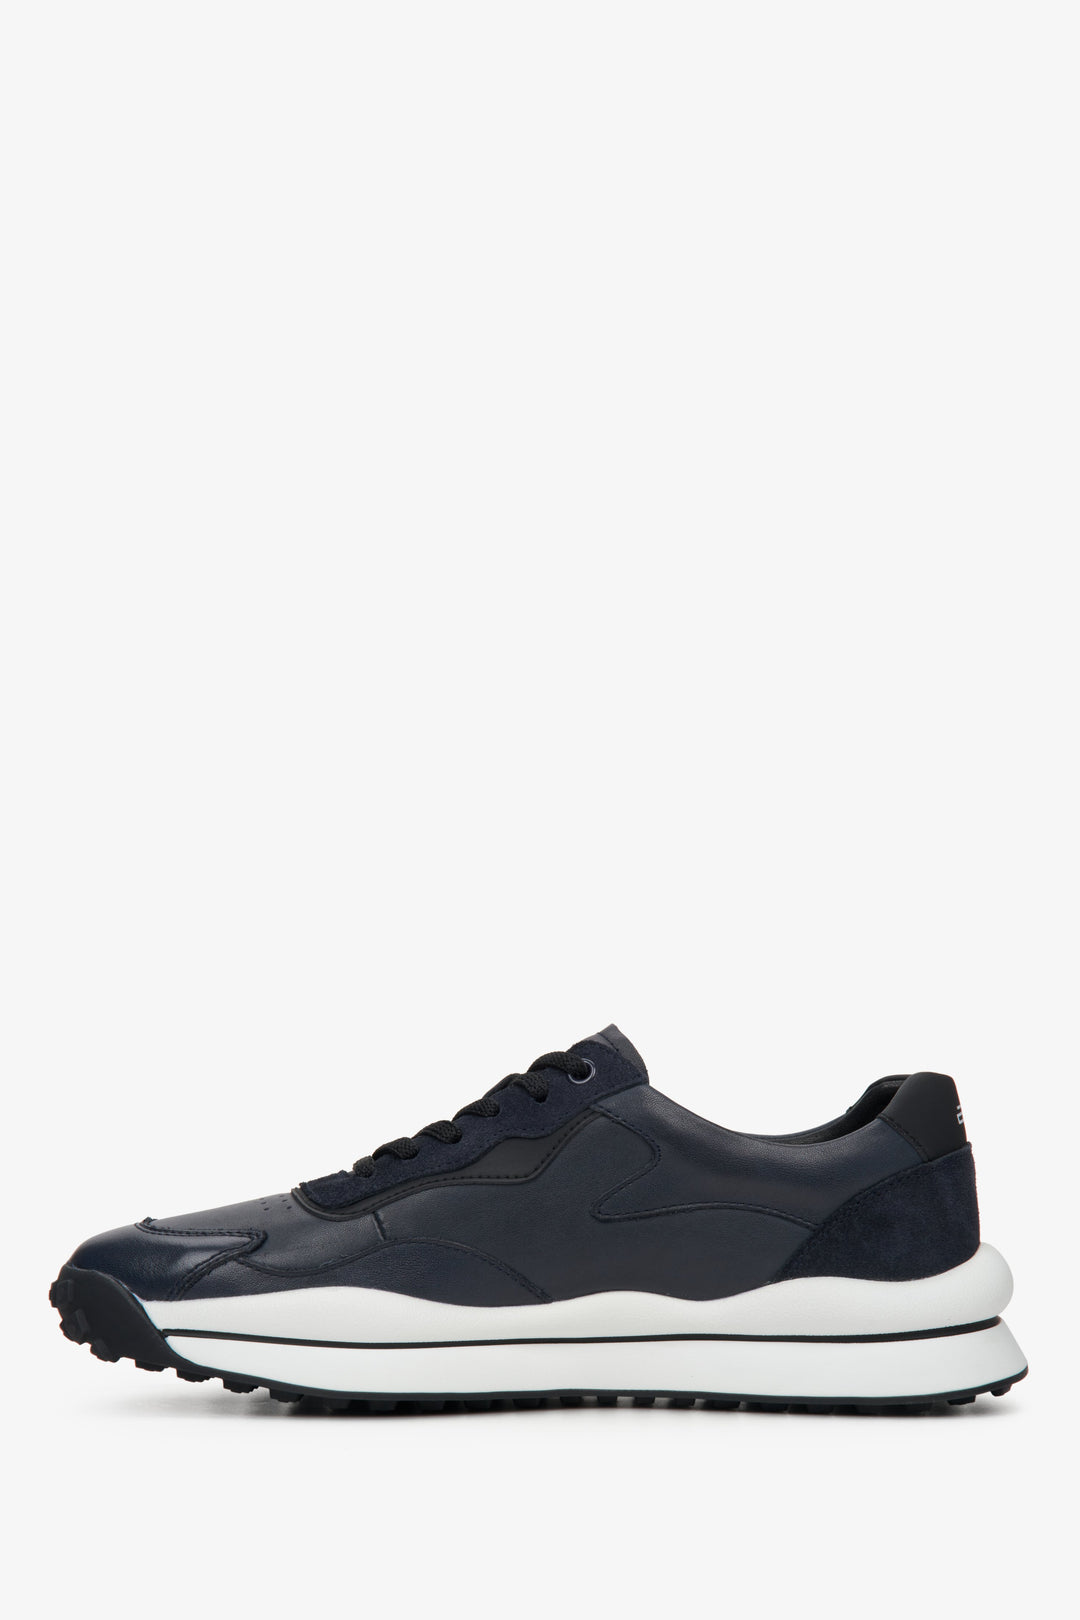 ES 8 navy blue men's sneakers for spring and autumn - profile view.